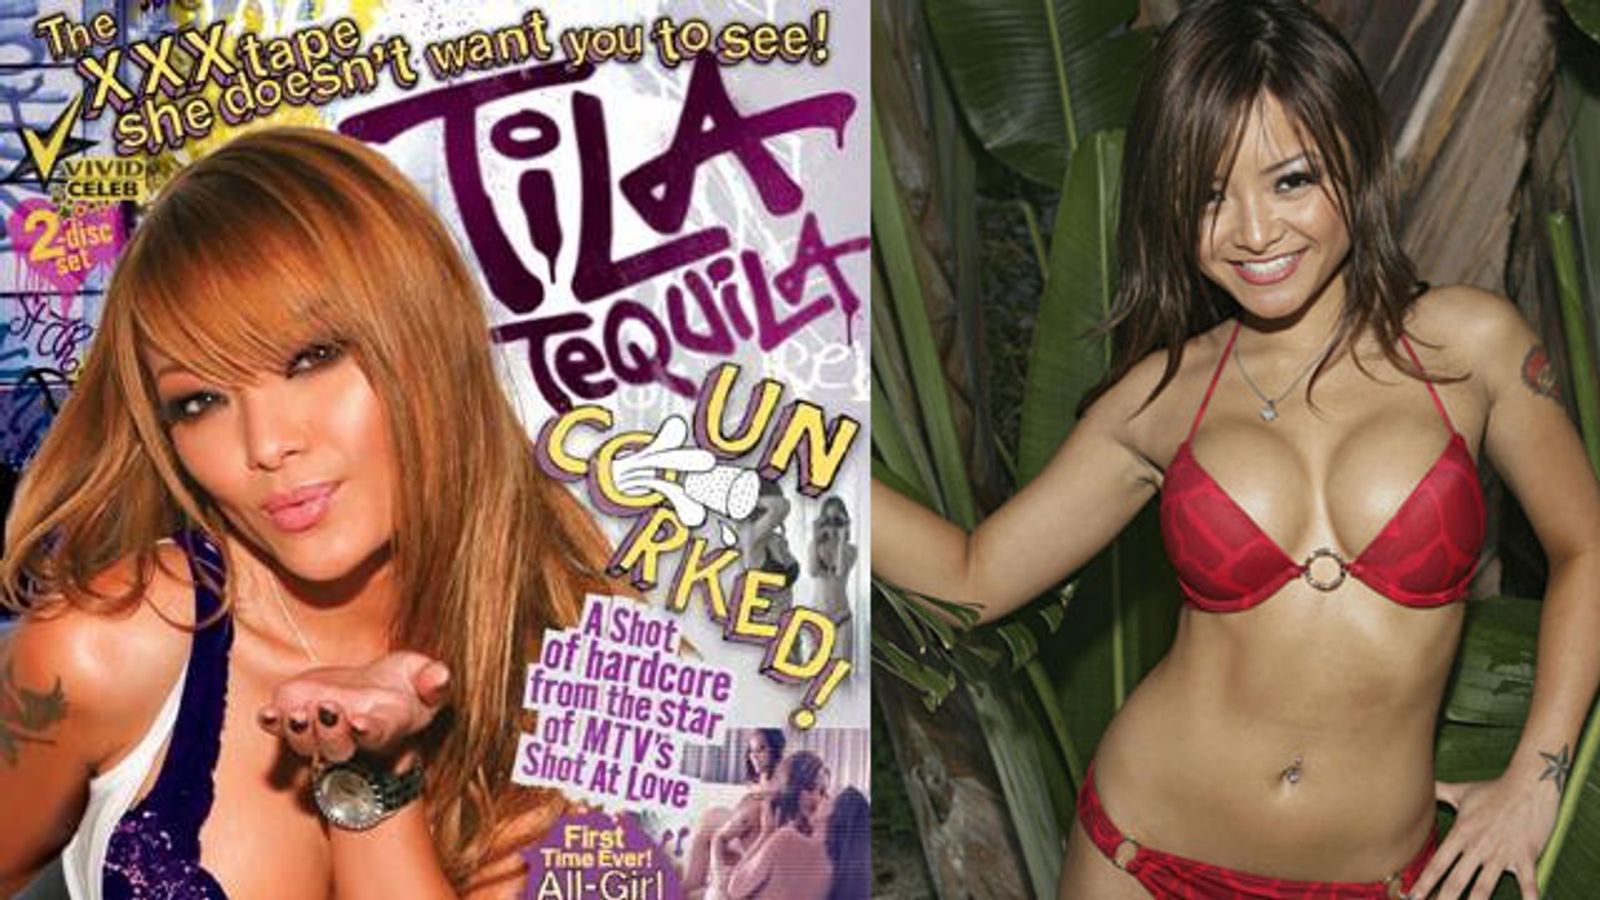 brian biscoe recommends Tila Tequila Having Sex